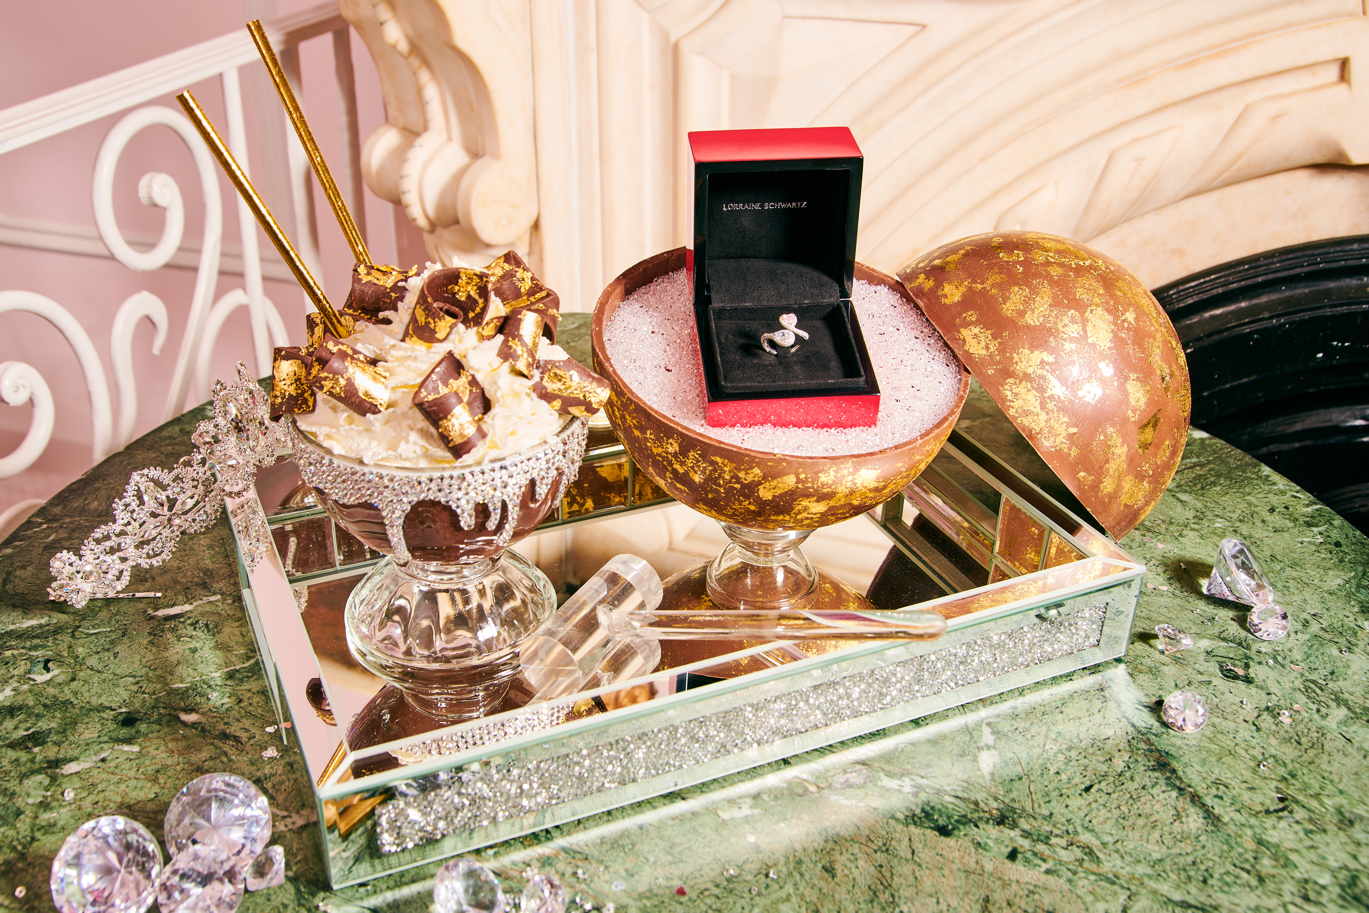 This $250K Dessert (One Of The World’s Most Expensive) REALLY Says ‘I Love You’